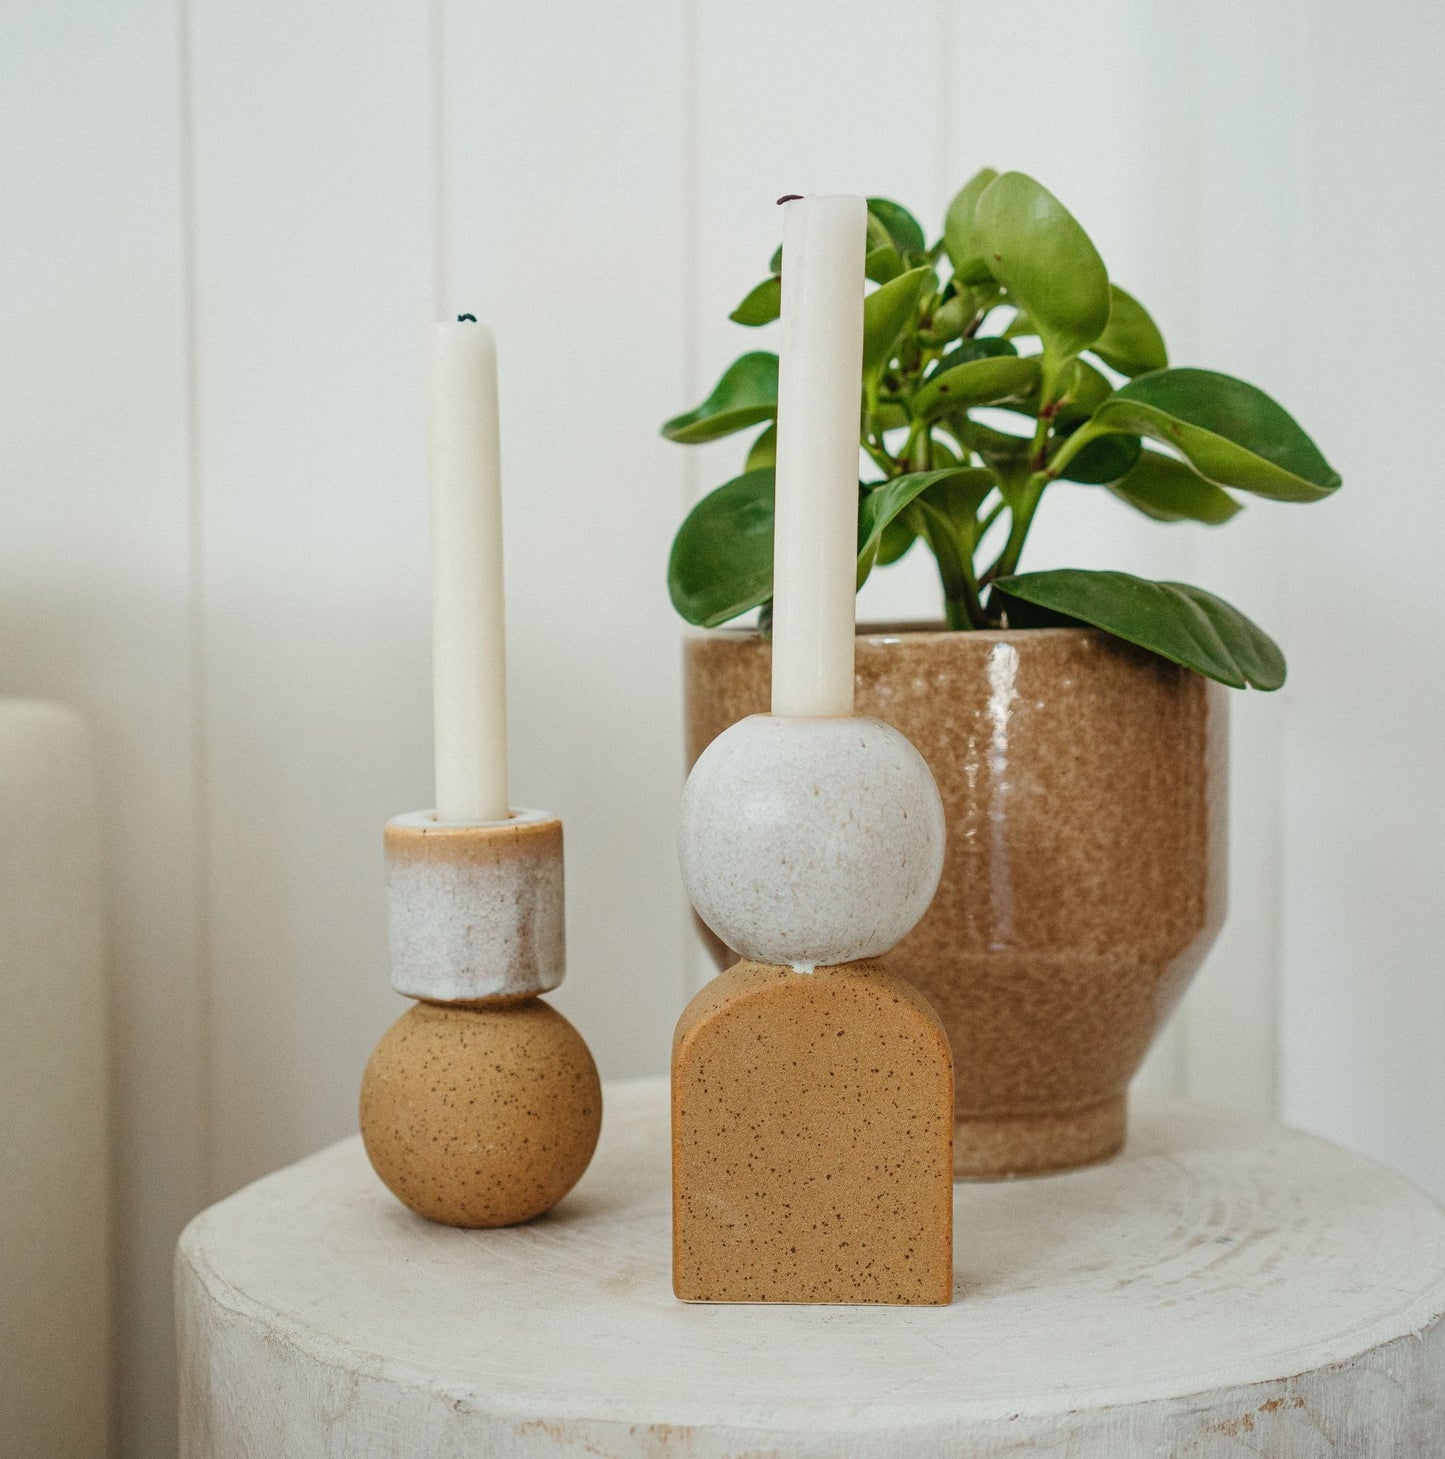 Sandy Clay Candle Holder